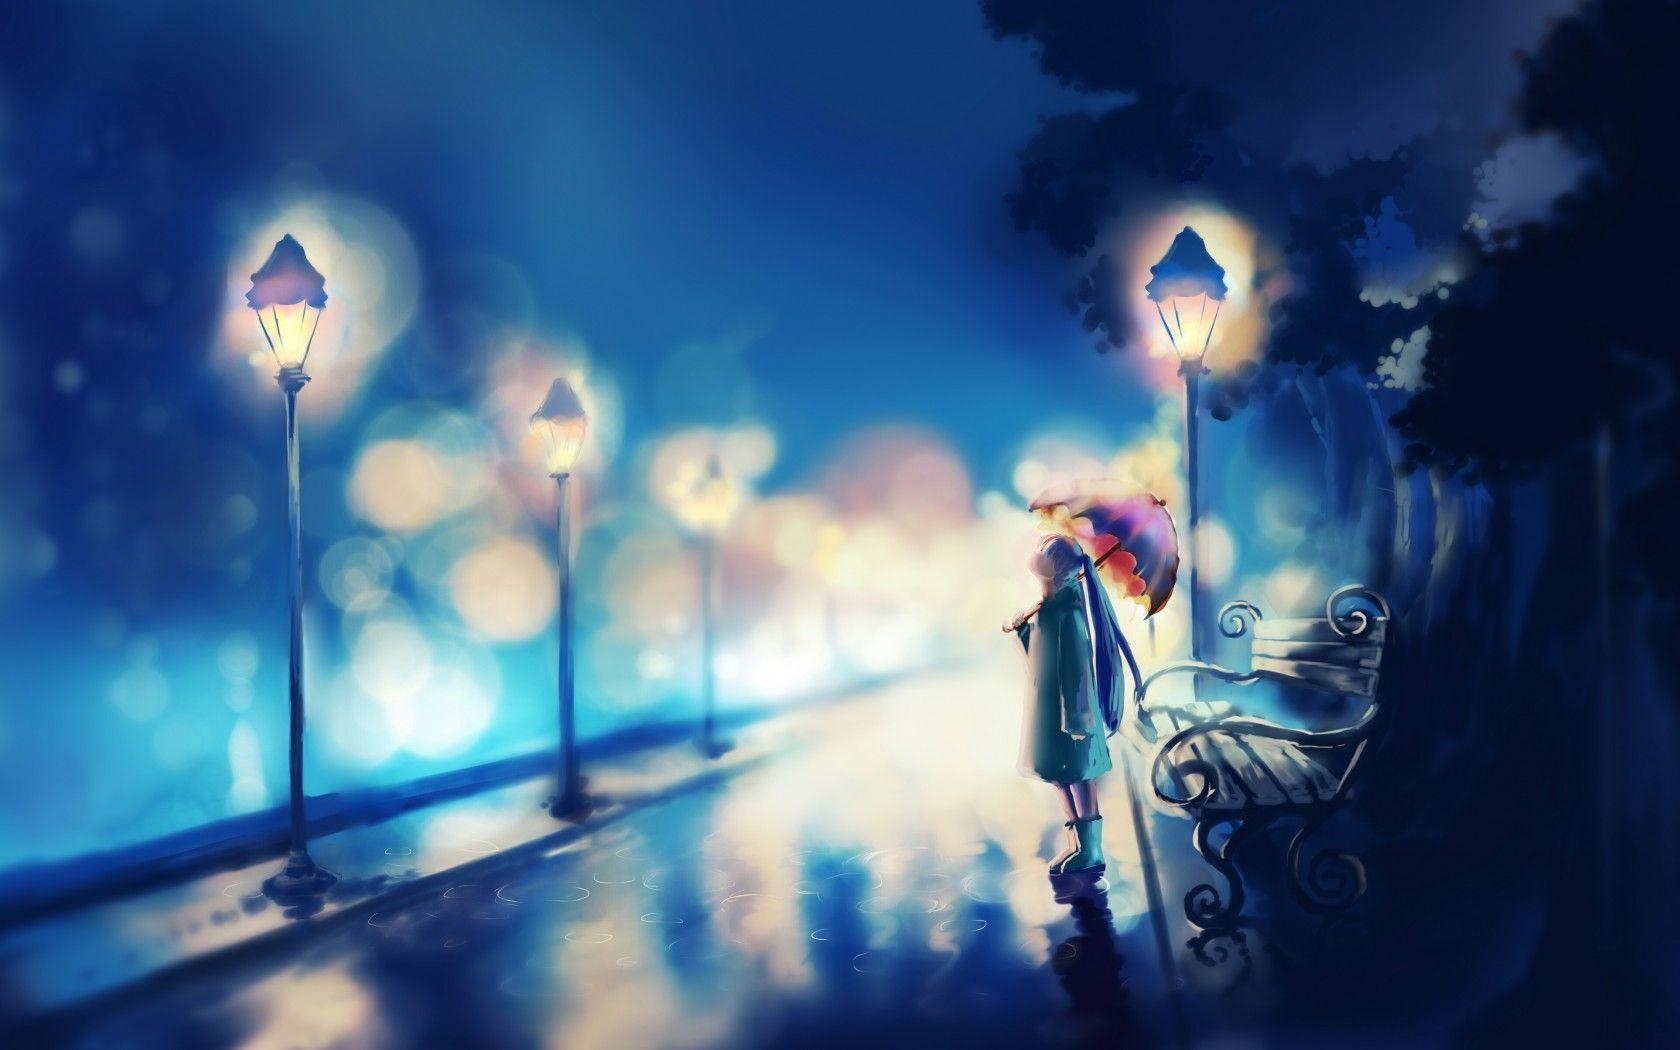 Night Lights Alone Girl Painting HD Trendy Picture Free